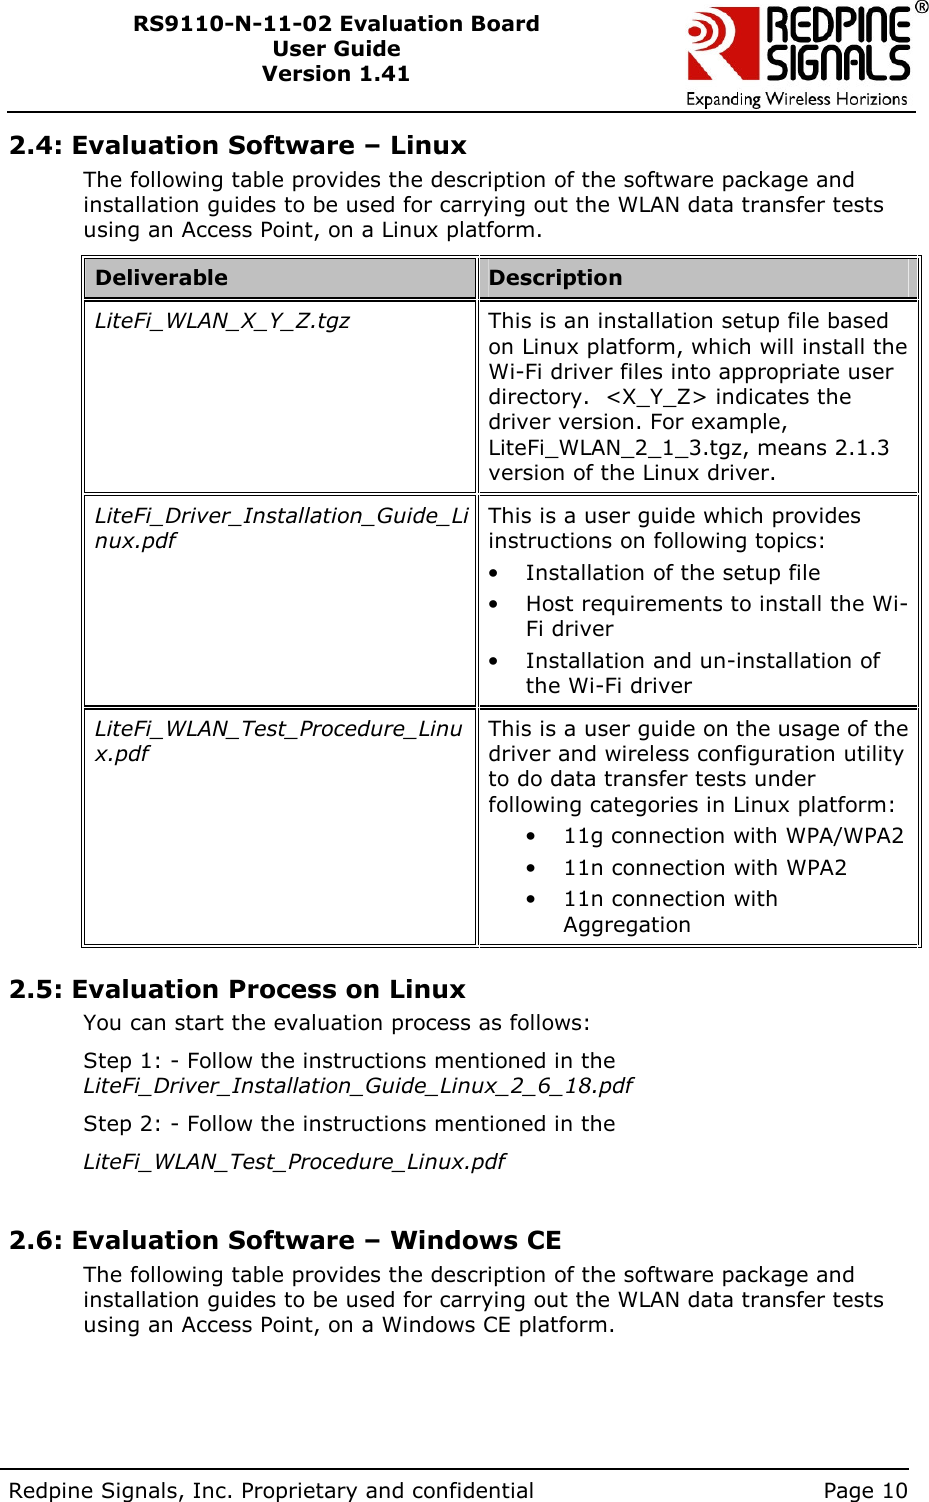        Redpine Signals, Inc. Proprietary and confidential    Page 10 RS9110-N-11-02 Evaluation Board User Guide Version 1.41  2.4: Evaluation Software – Linux The following table provides the description of the software package and installation guides to be used for carrying out the WLAN data transfer tests using an Access Point, on a Linux platform. Deliverable  Description LiteFi_WLAN_X_Y_Z.tgz  This is an installation setup file based on Linux platform, which will install the Wi-Fi driver files into appropriate user directory.  &lt;X_Y_Z&gt; indicates the driver version. For example, LiteFi_WLAN_2_1_3.tgz, means 2.1.3 version of the Linux driver. LiteFi_Driver_Installation_Guide_Linux.pdf This is a user guide which provides instructions on following topics: •  Installation of the setup file •  Host requirements to install the Wi-Fi driver  •  Installation and un-installation of the Wi-Fi driver LiteFi_WLAN_Test_Procedure_Linux.pdf This is a user guide on the usage of the driver and wireless configuration utility to do data transfer tests under following categories in Linux platform: •  11g connection with WPA/WPA2 •  11n connection with WPA2 •  11n connection with Aggregation  2.5: Evaluation Process on Linux You can start the evaluation process as follows: Step 1: - Follow the instructions mentioned in the   LiteFi_Driver_Installation_Guide_Linux_2_6_18.pdf Step 2: - Follow the instructions mentioned in the  LiteFi_WLAN_Test_Procedure_Linux.pdf   2.6: Evaluation Software – Windows CE The following table provides the description of the software package and installation guides to be used for carrying out the WLAN data transfer tests using an Access Point, on a Windows CE platform. 